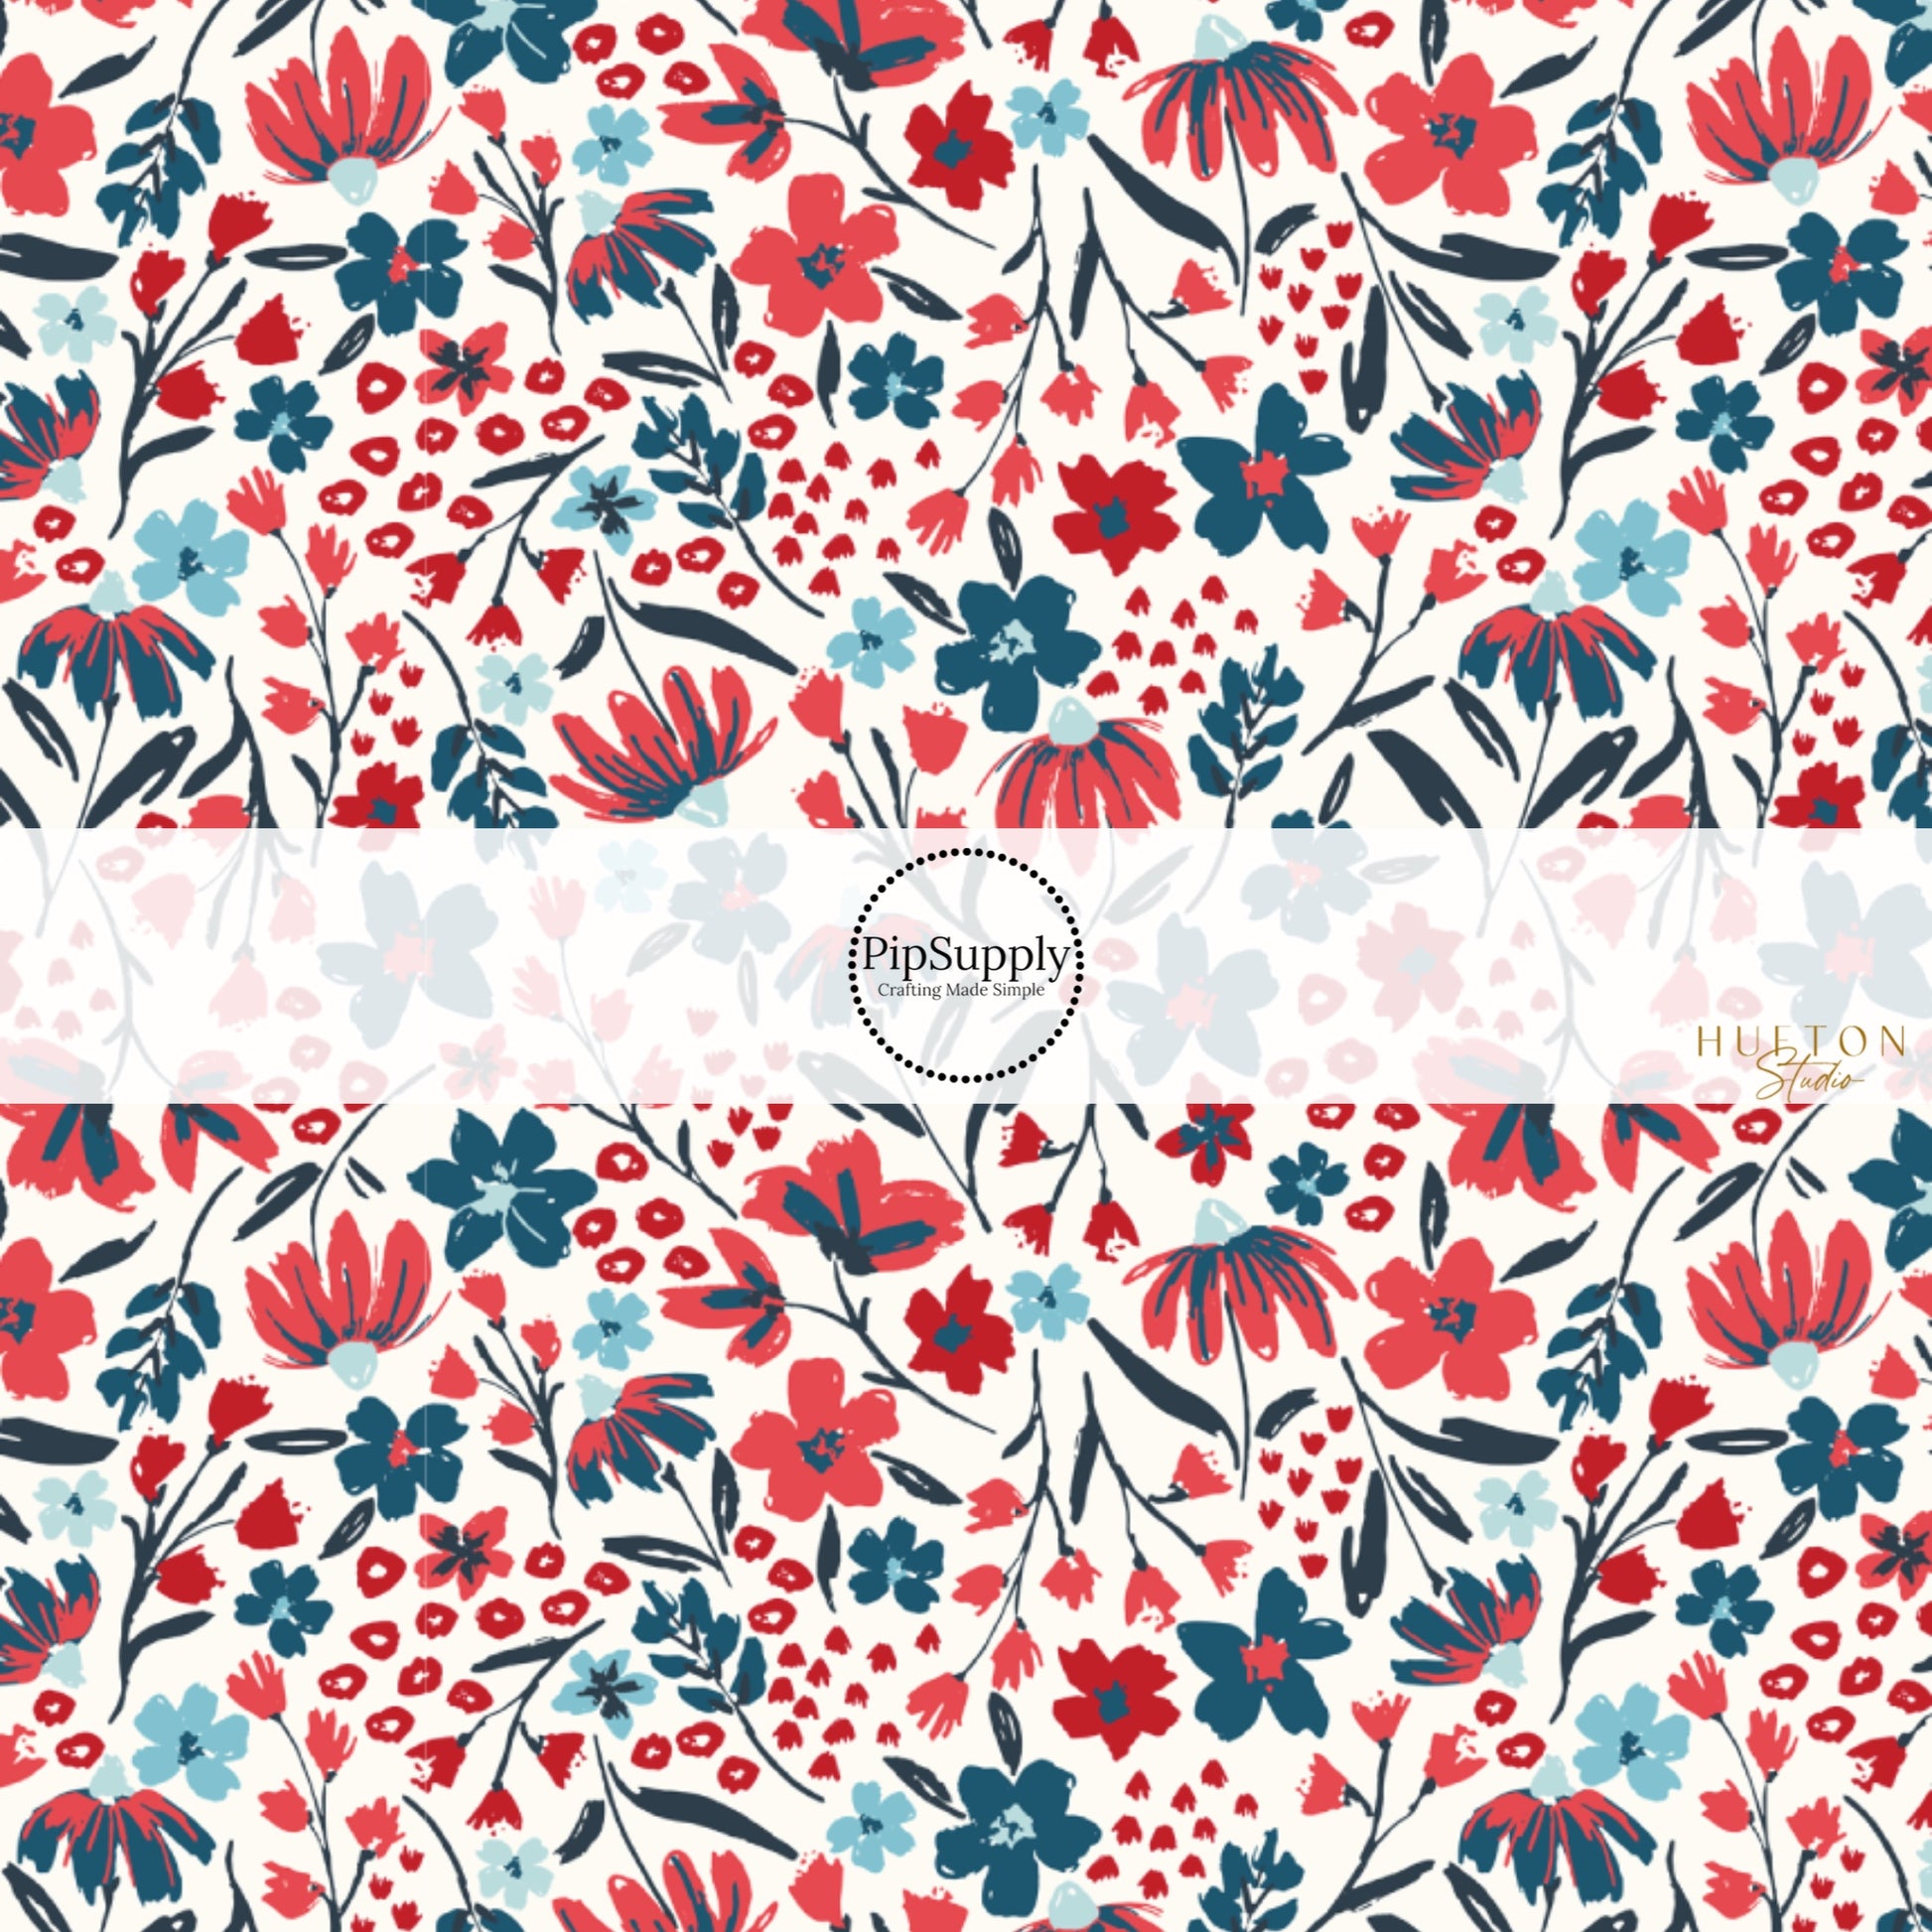 This 4th of July fabric by the yard features patriotic red and blue flowers on cream. This fun patriotic themed fabric can be used for all your sewing and crafting needs!